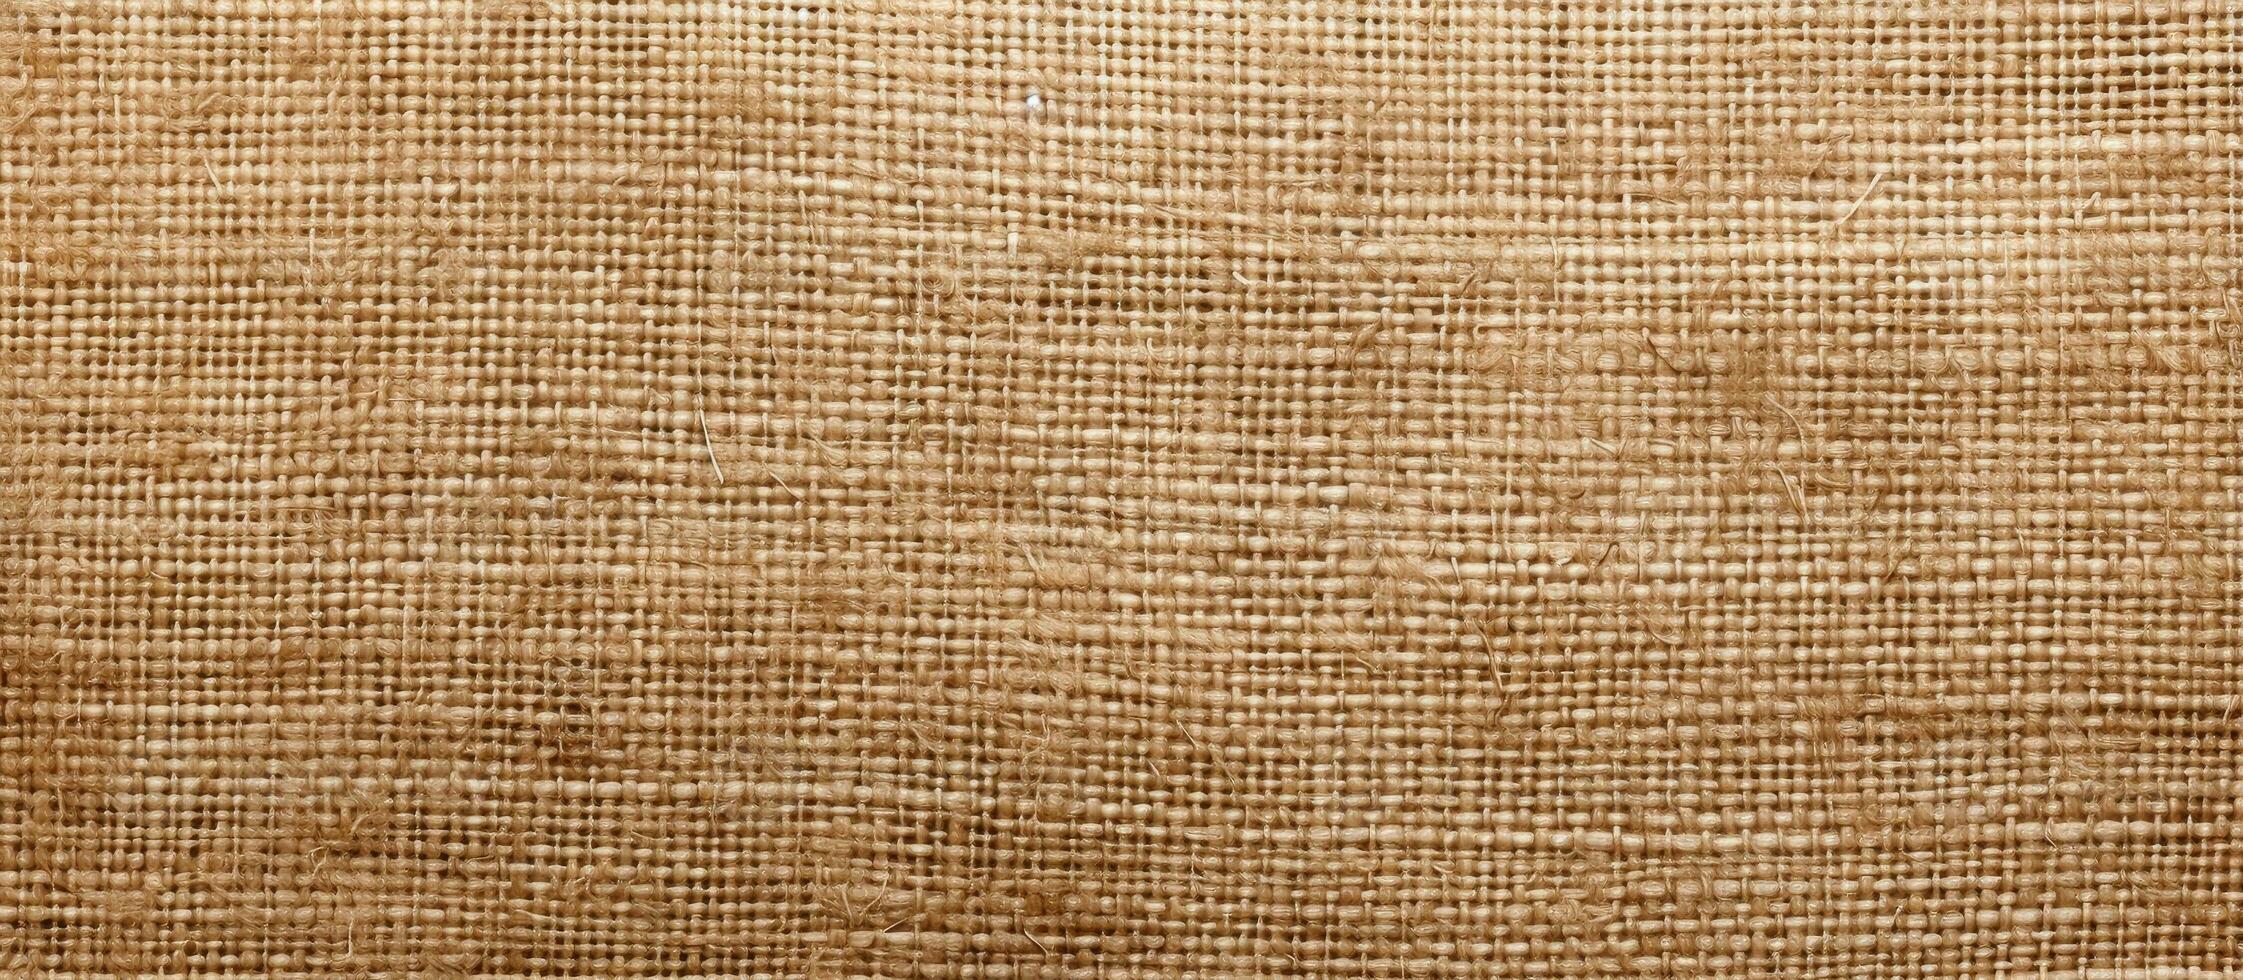 https://static.vecteezy.com/system/resources/previews/028/217/918/non_2x/jute-like-or-canvas-like-fabric-texture-in-vintage-style-photo.jpg